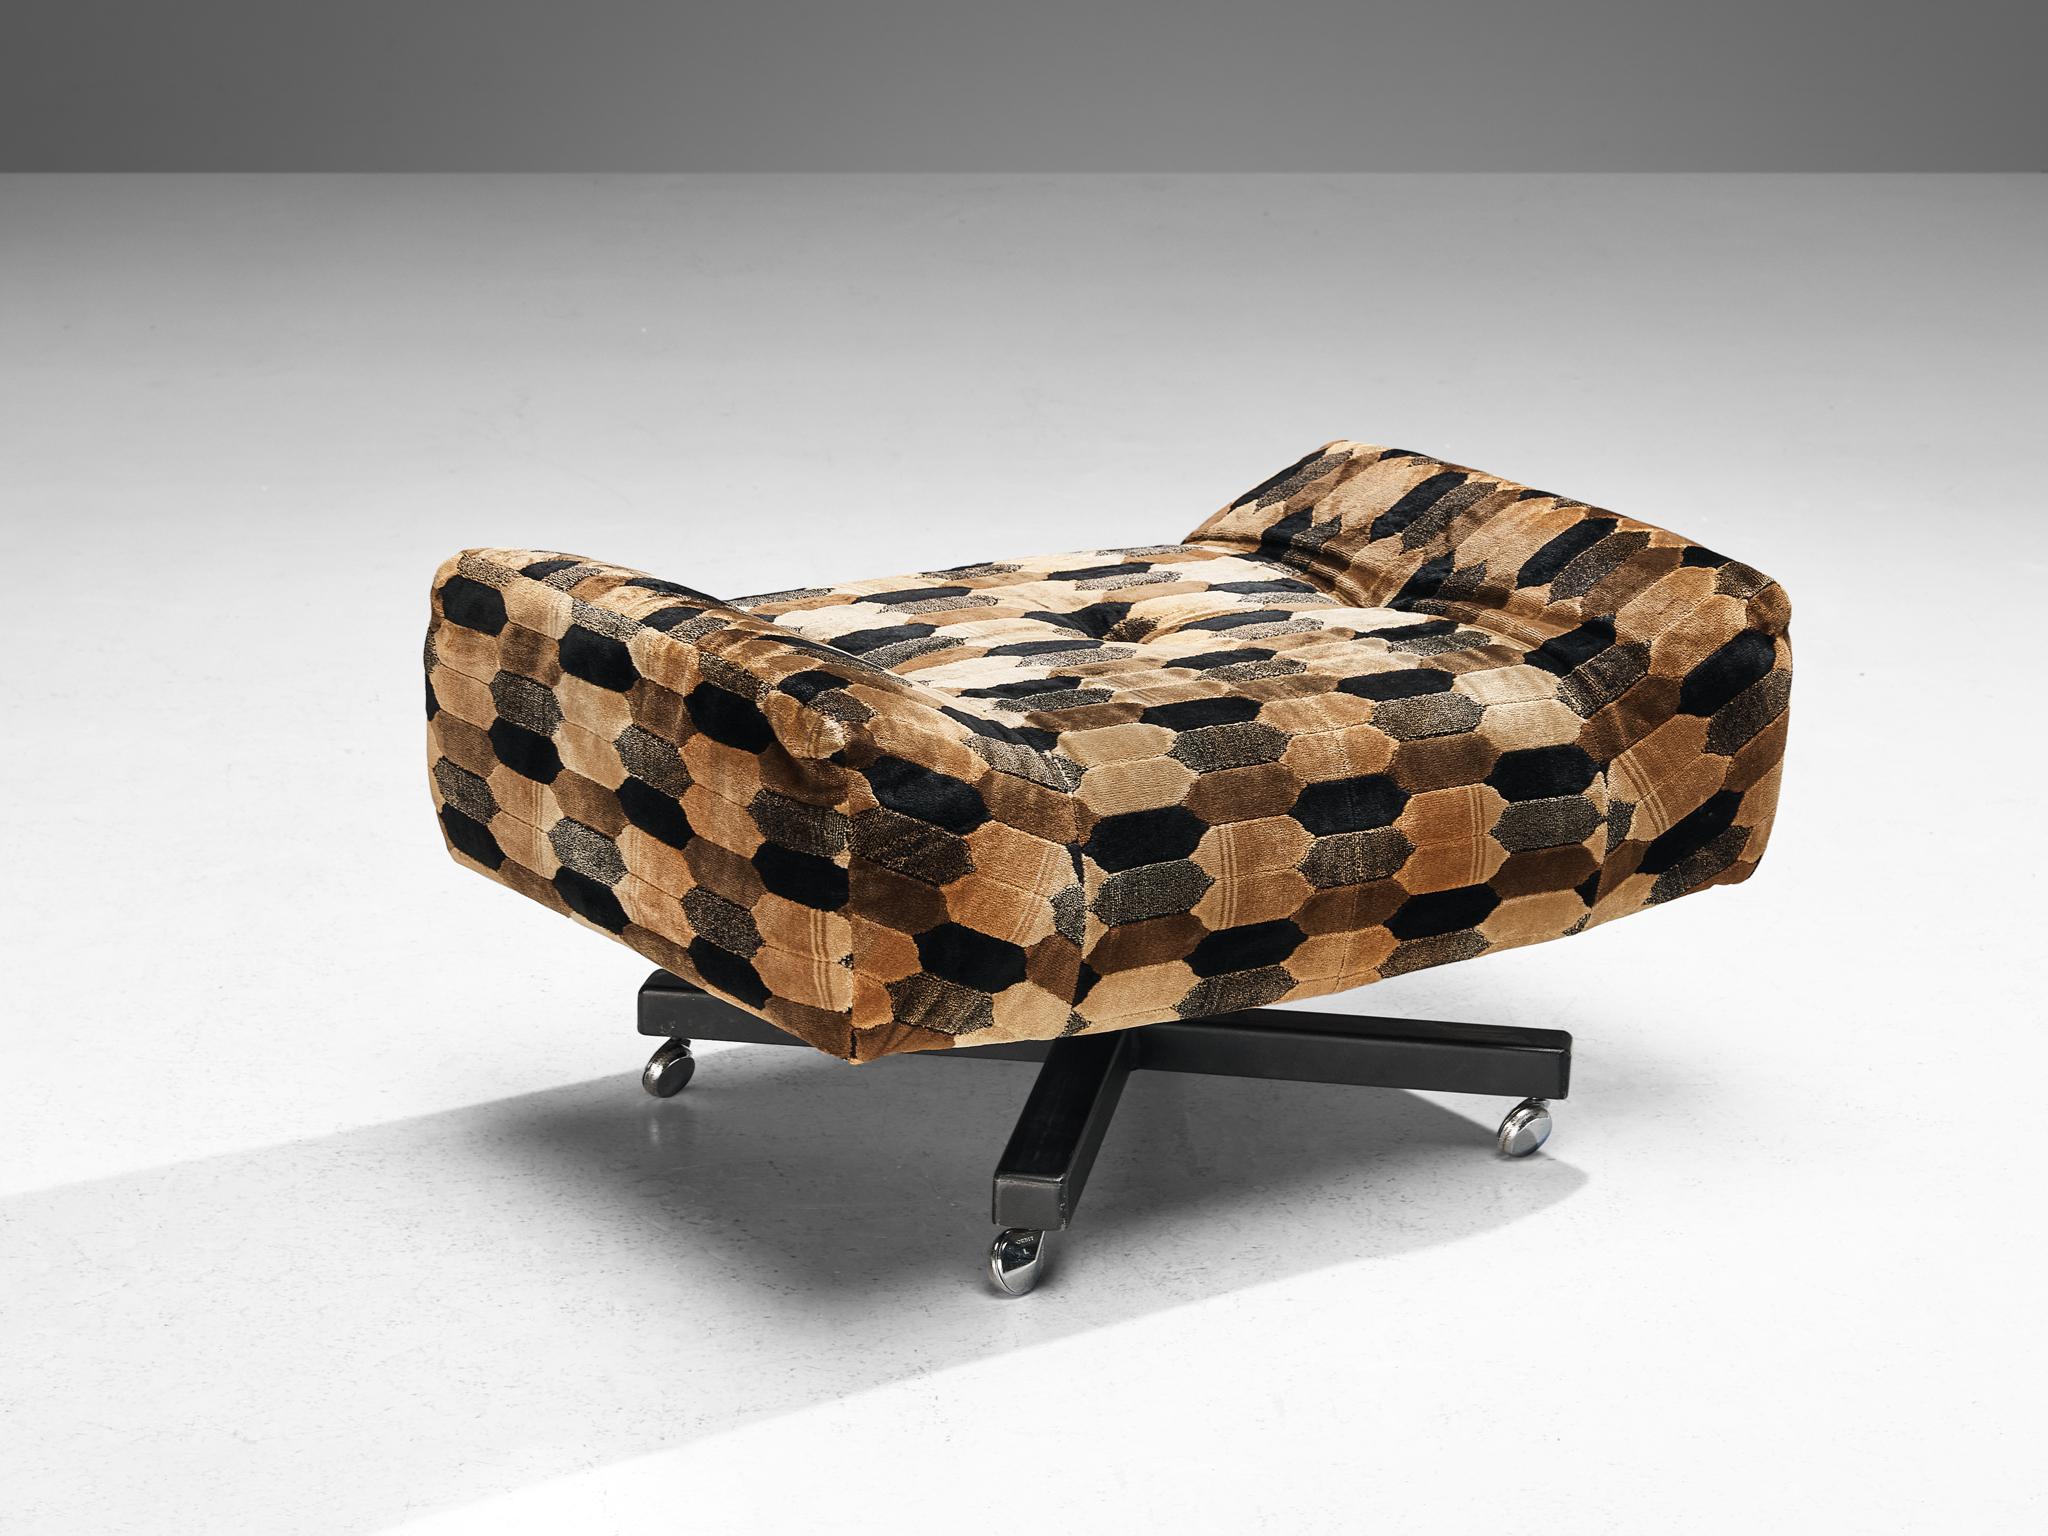 Ottoman or footrest, steel, fabric, Europe, 1970s

This comfortable ottoman is made in Europe in the 1970s. The colorful silk upholstery catches the eye of this piece. Neutral tones of brown and black create an interesting and comfortable piece for